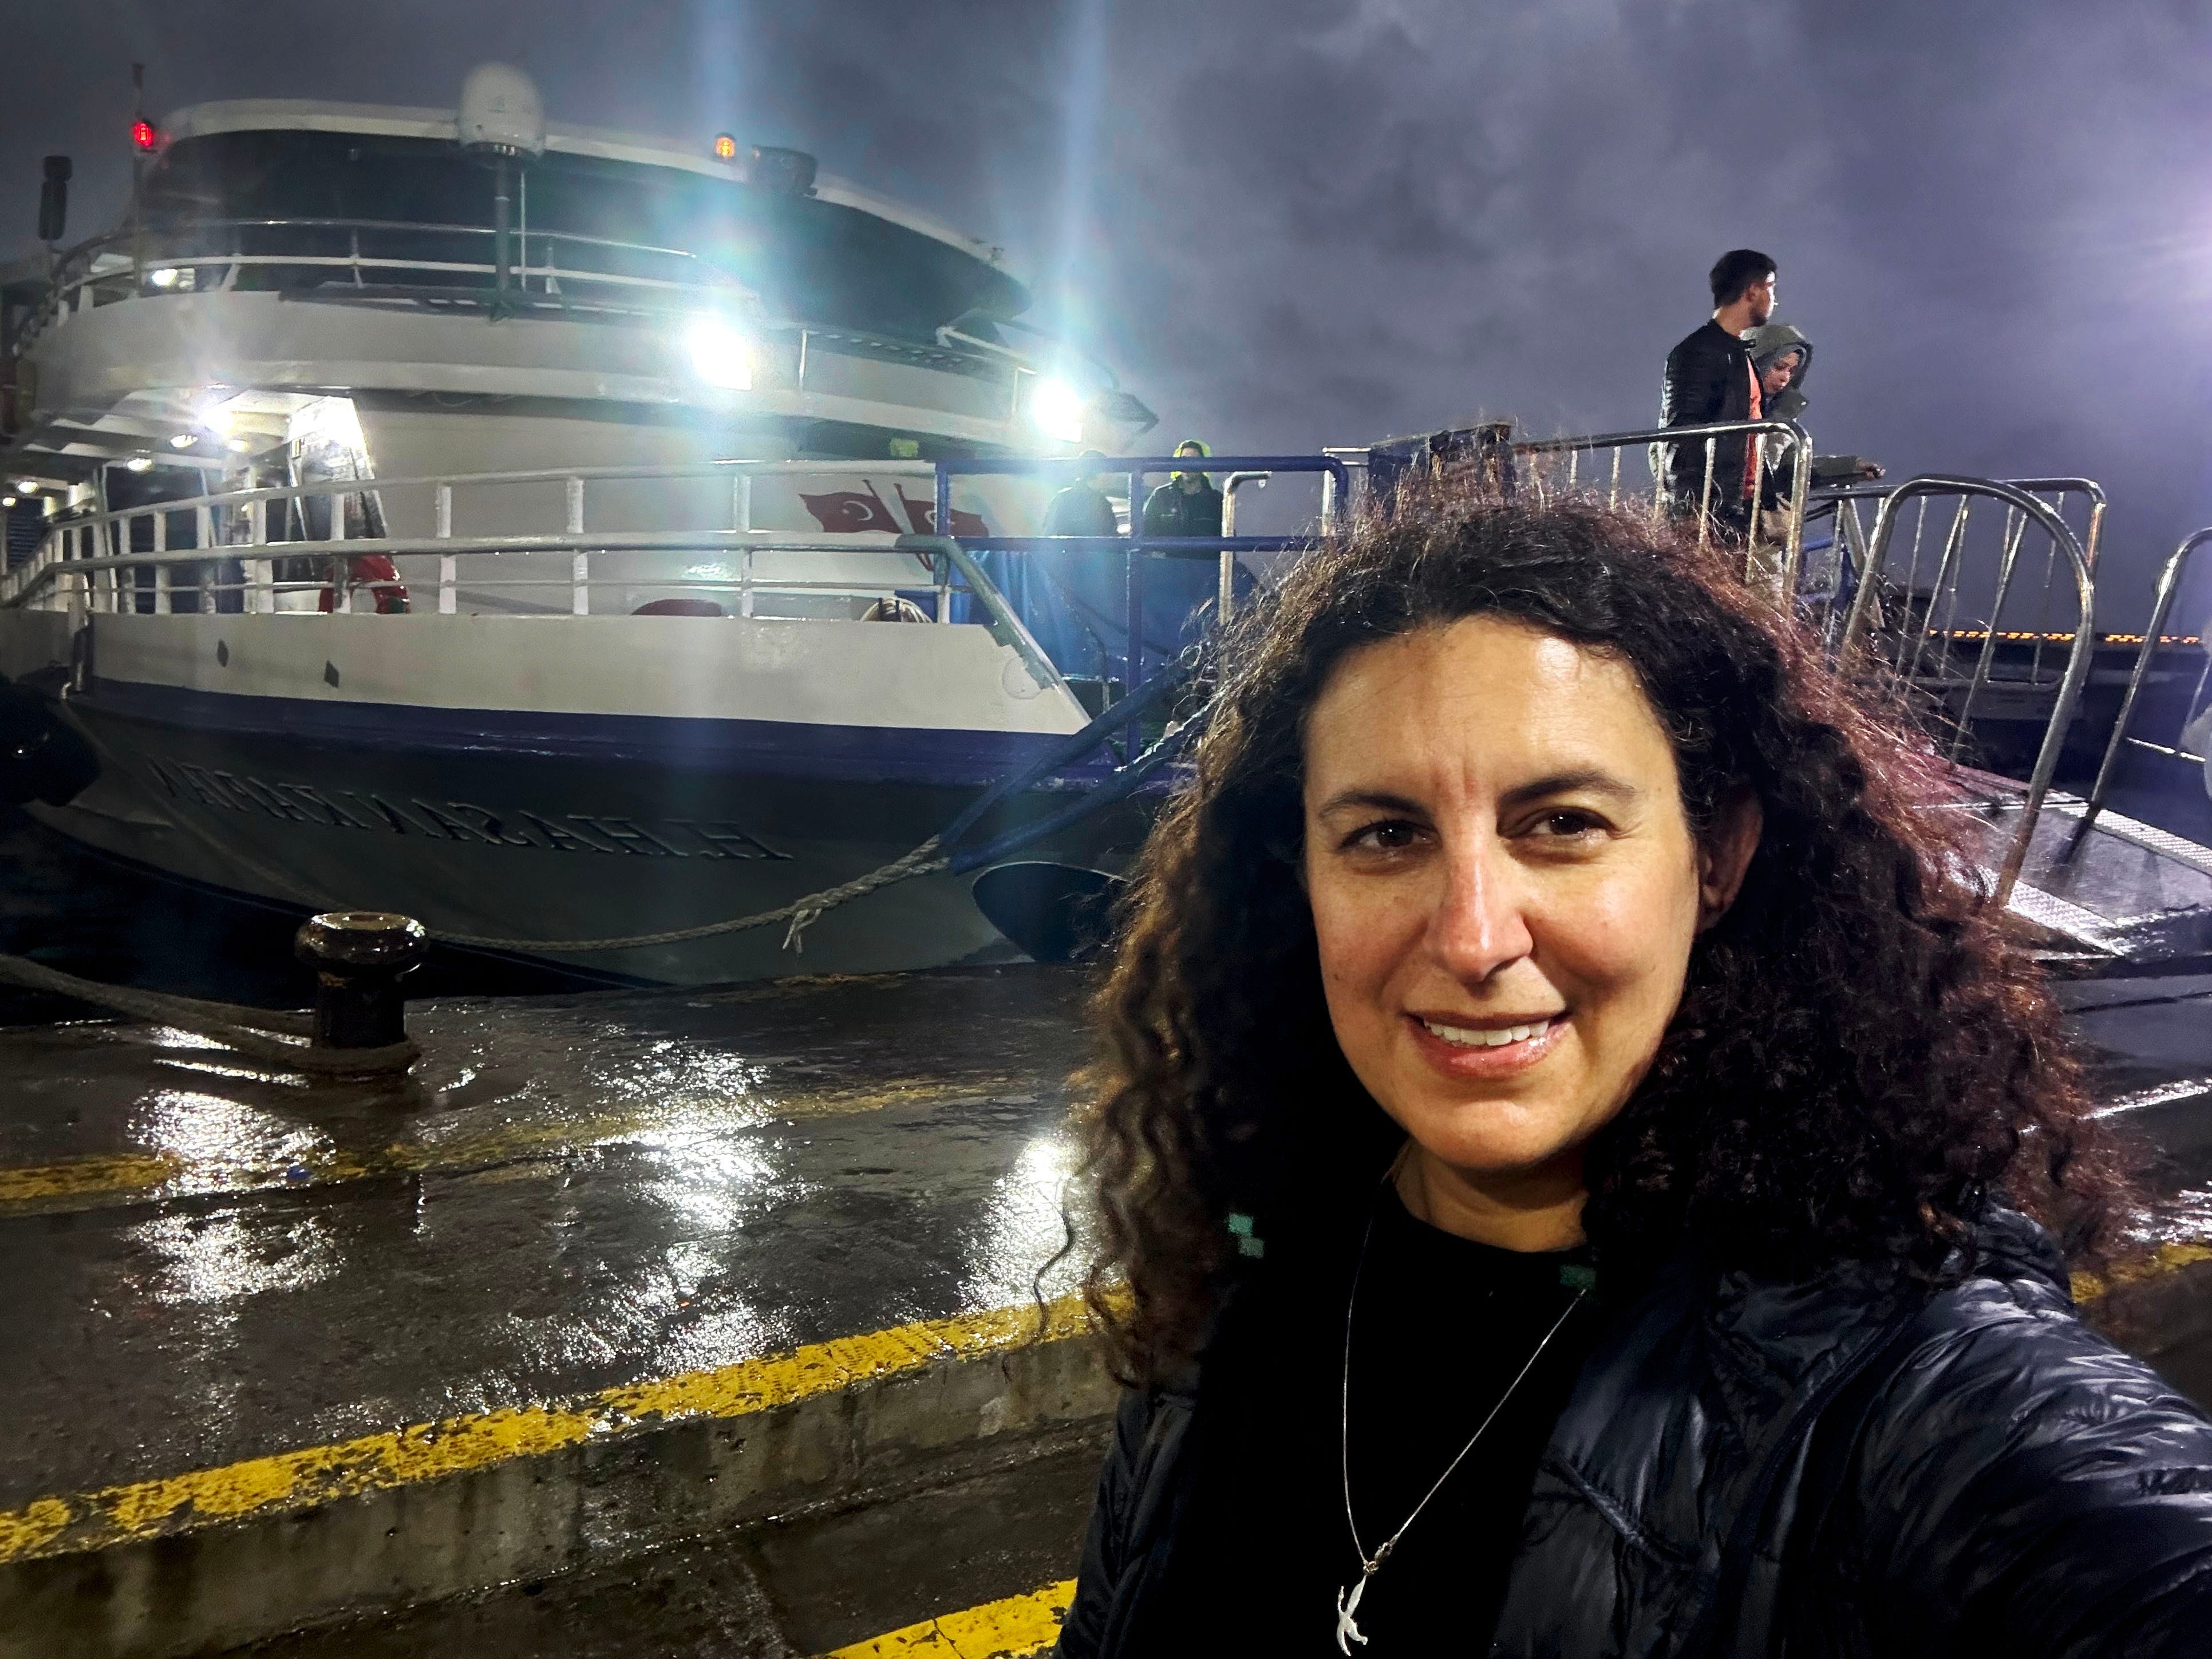 I took a 20-minute ferry ride from Europe to Asia for $1. I was shocked I didn't see more tourists on board.